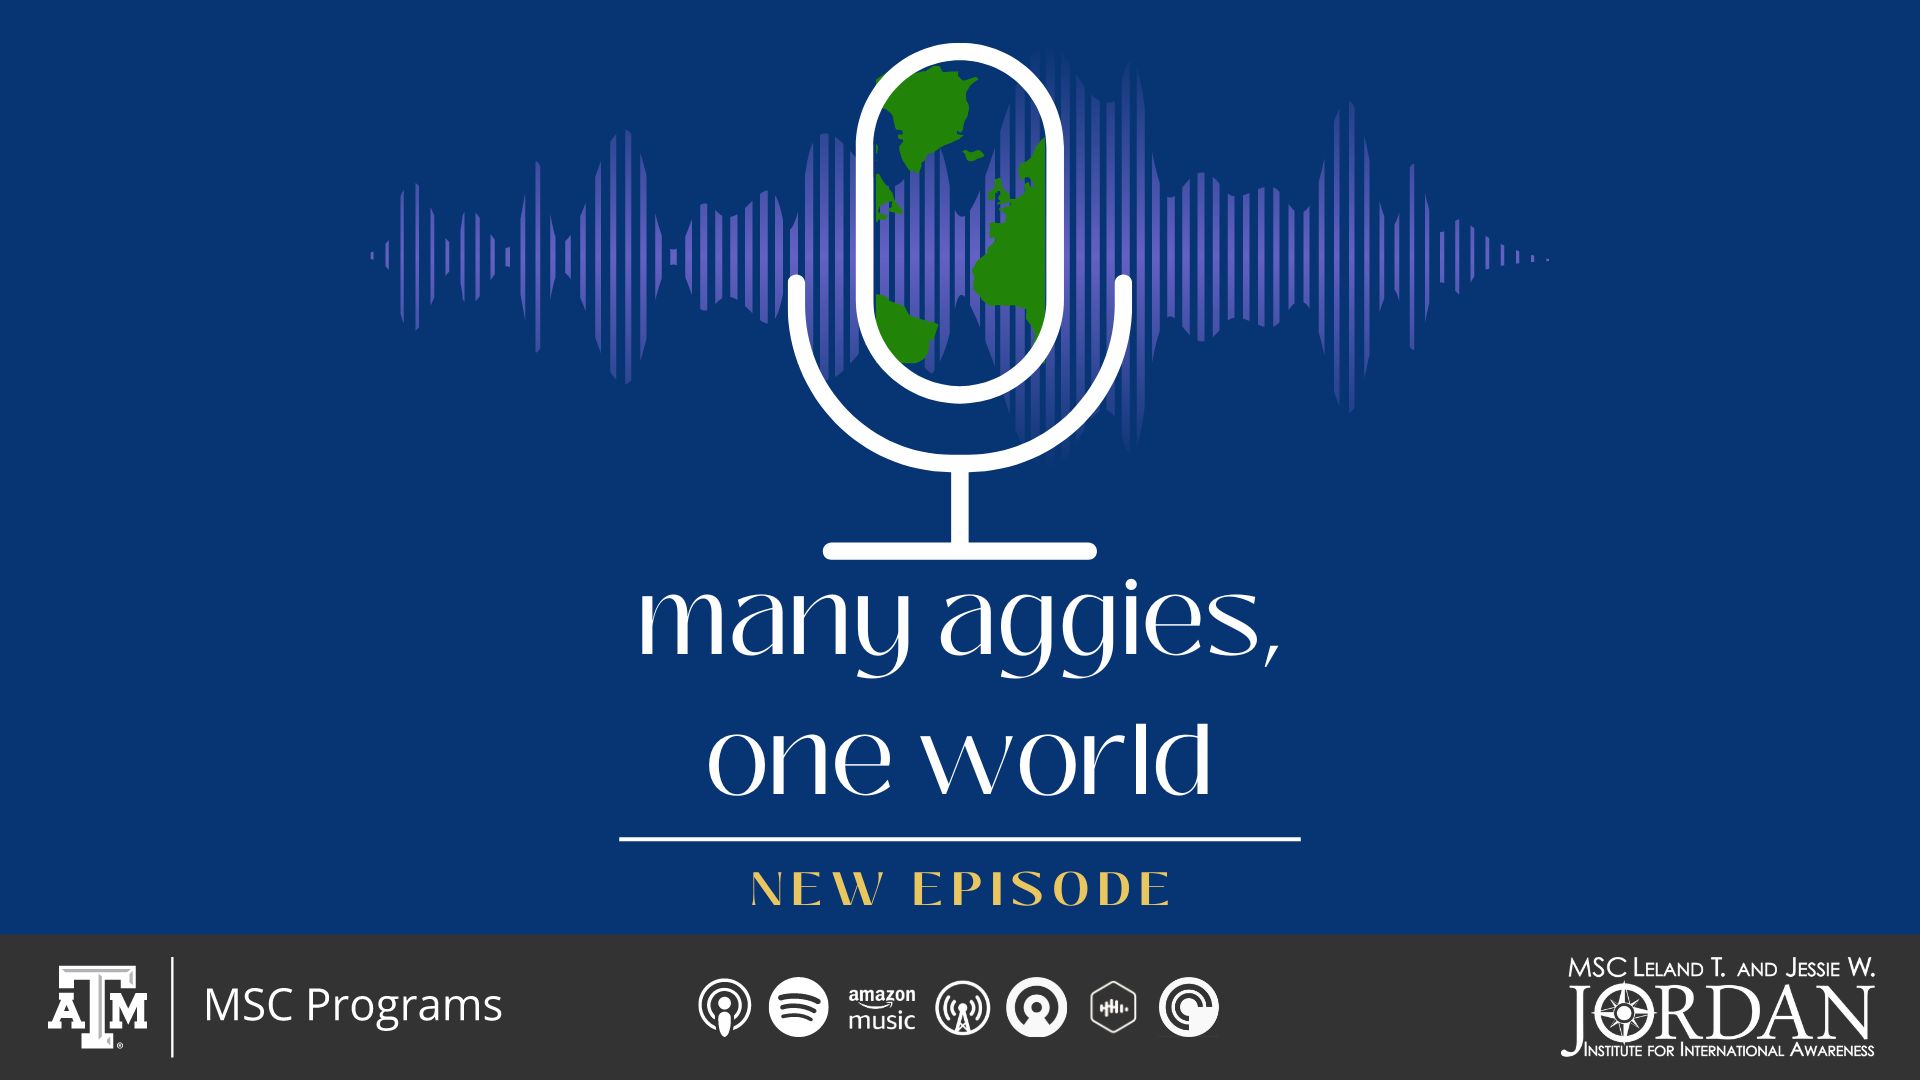 MSC L.T. Jordan Institute presents: Many Aggies, One World. Podcast Series. New Episode. iTunes Podcasts, Spotify, Amazon Music, Overcast, Castro Cast, Castbox, Pocket Casts